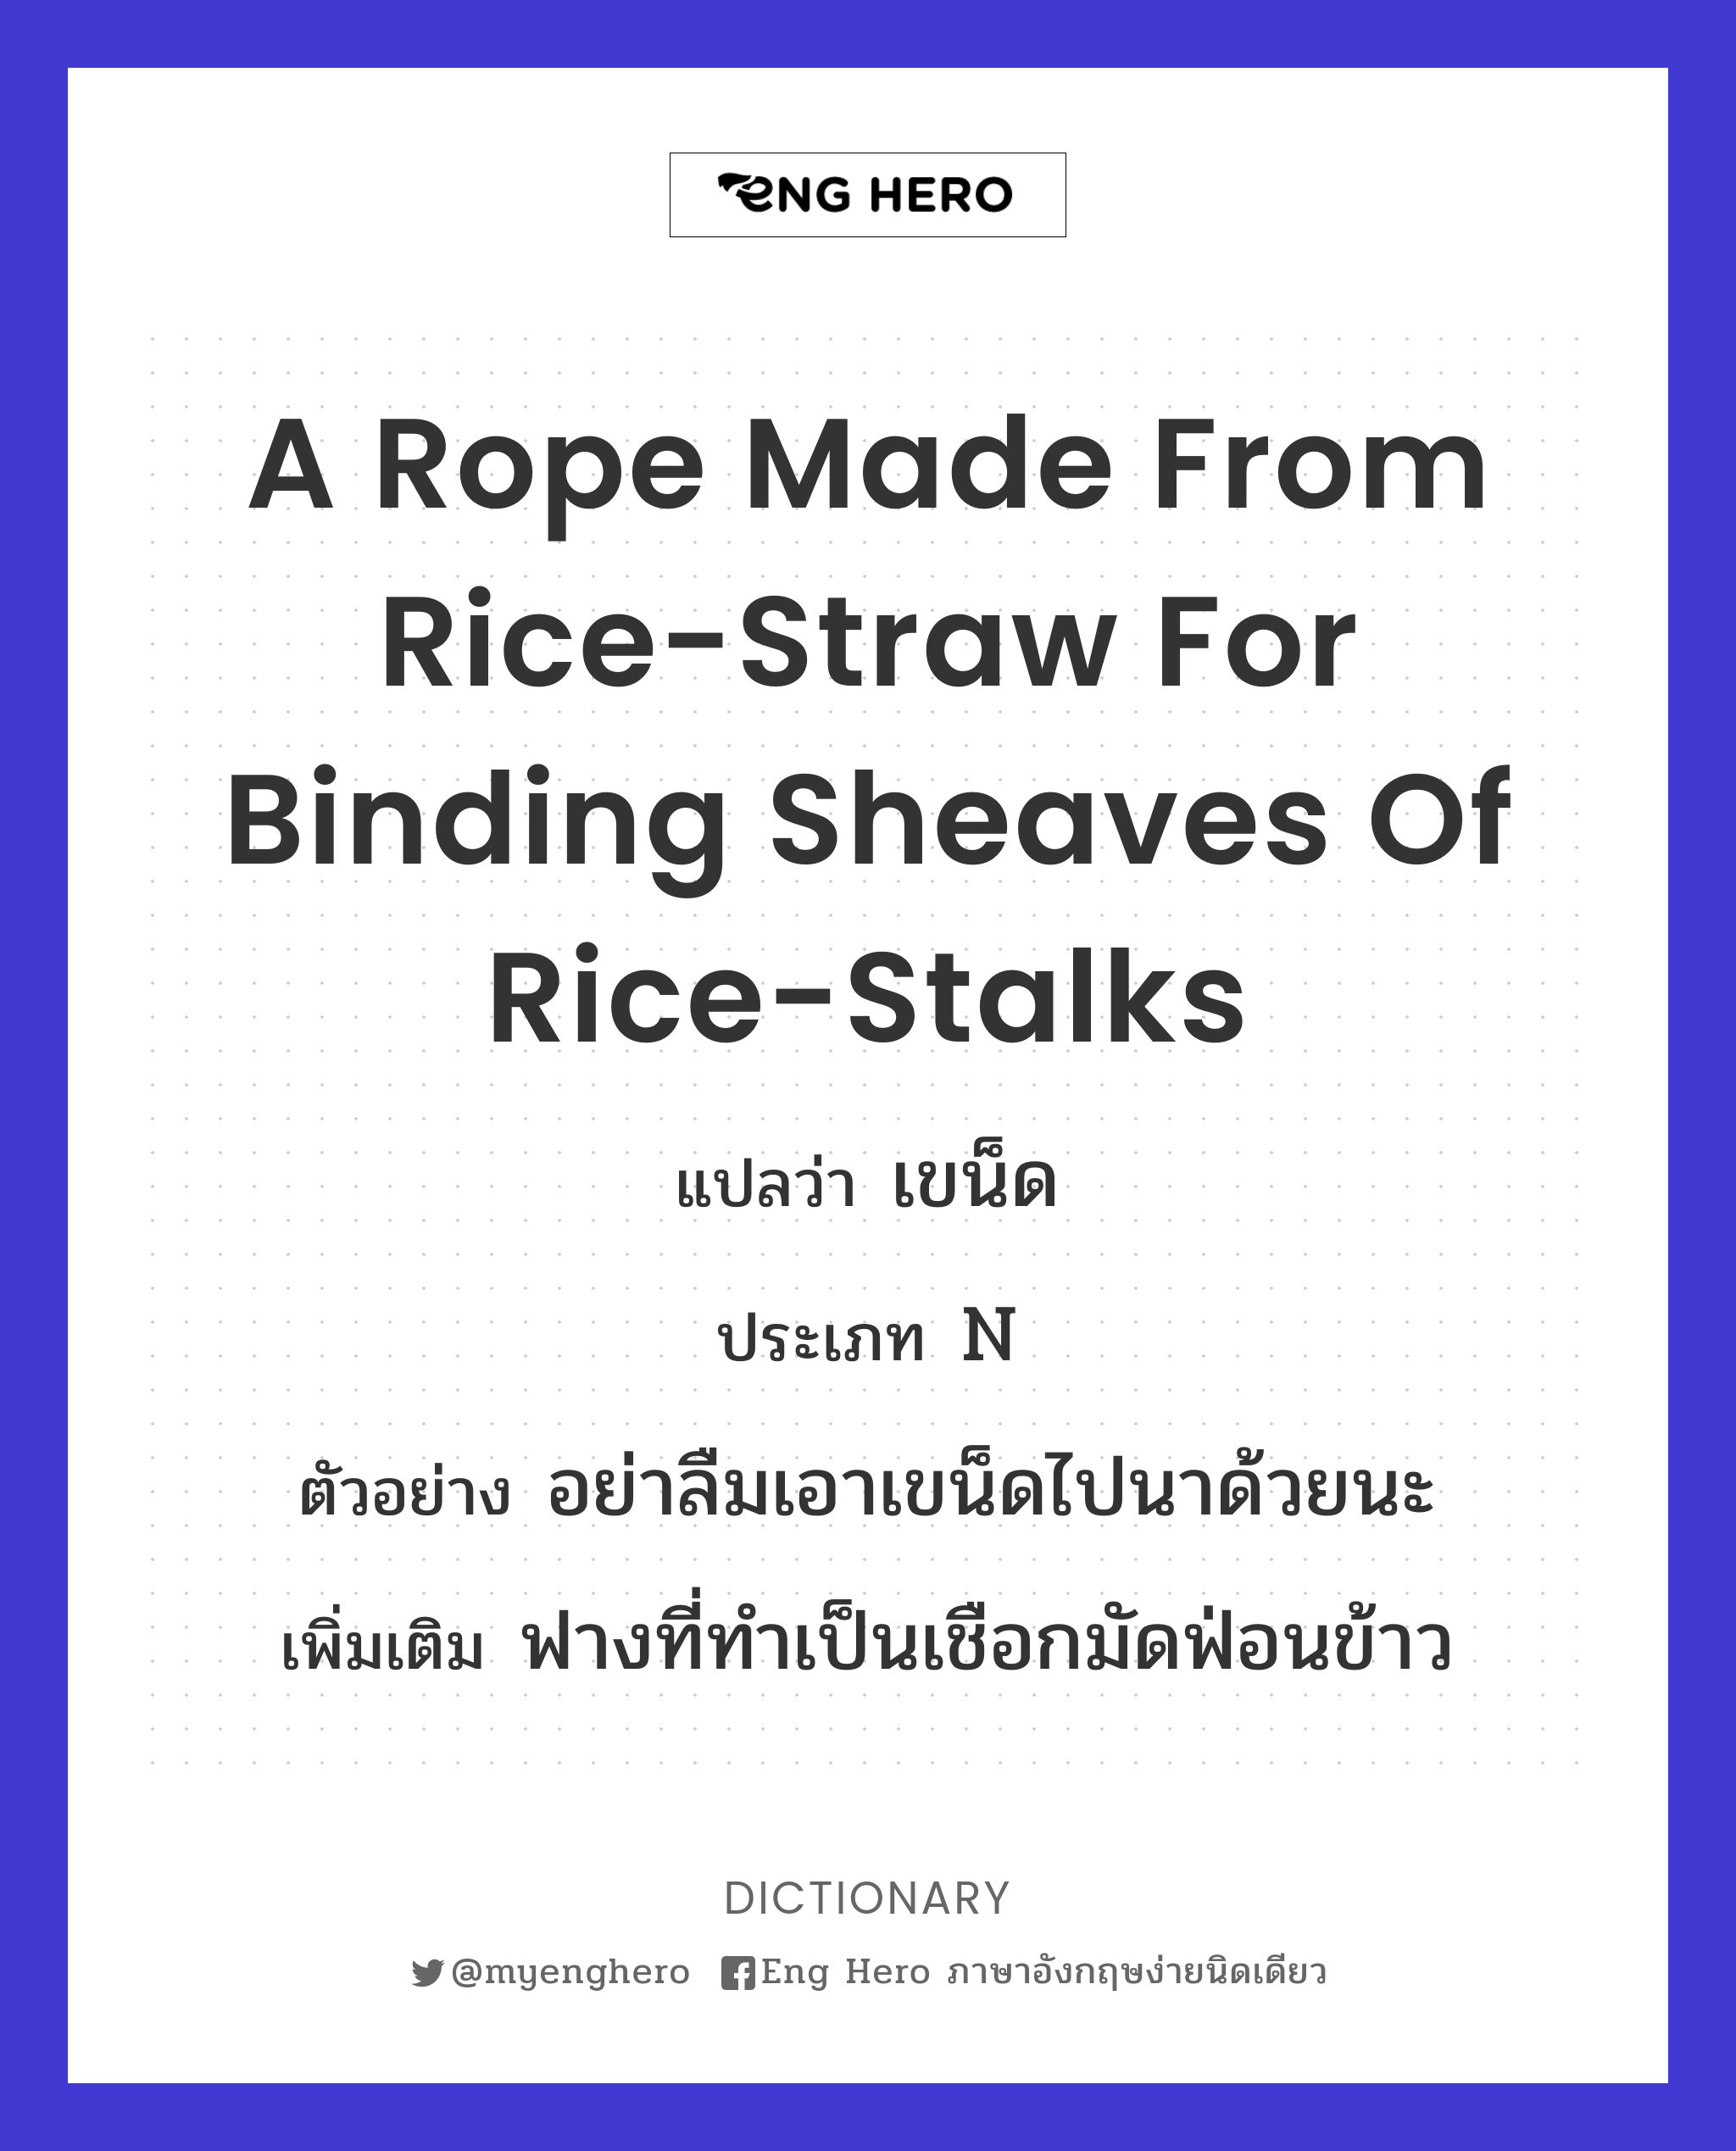 a rope made from rice-straw for binding sheaves of rice-stalks